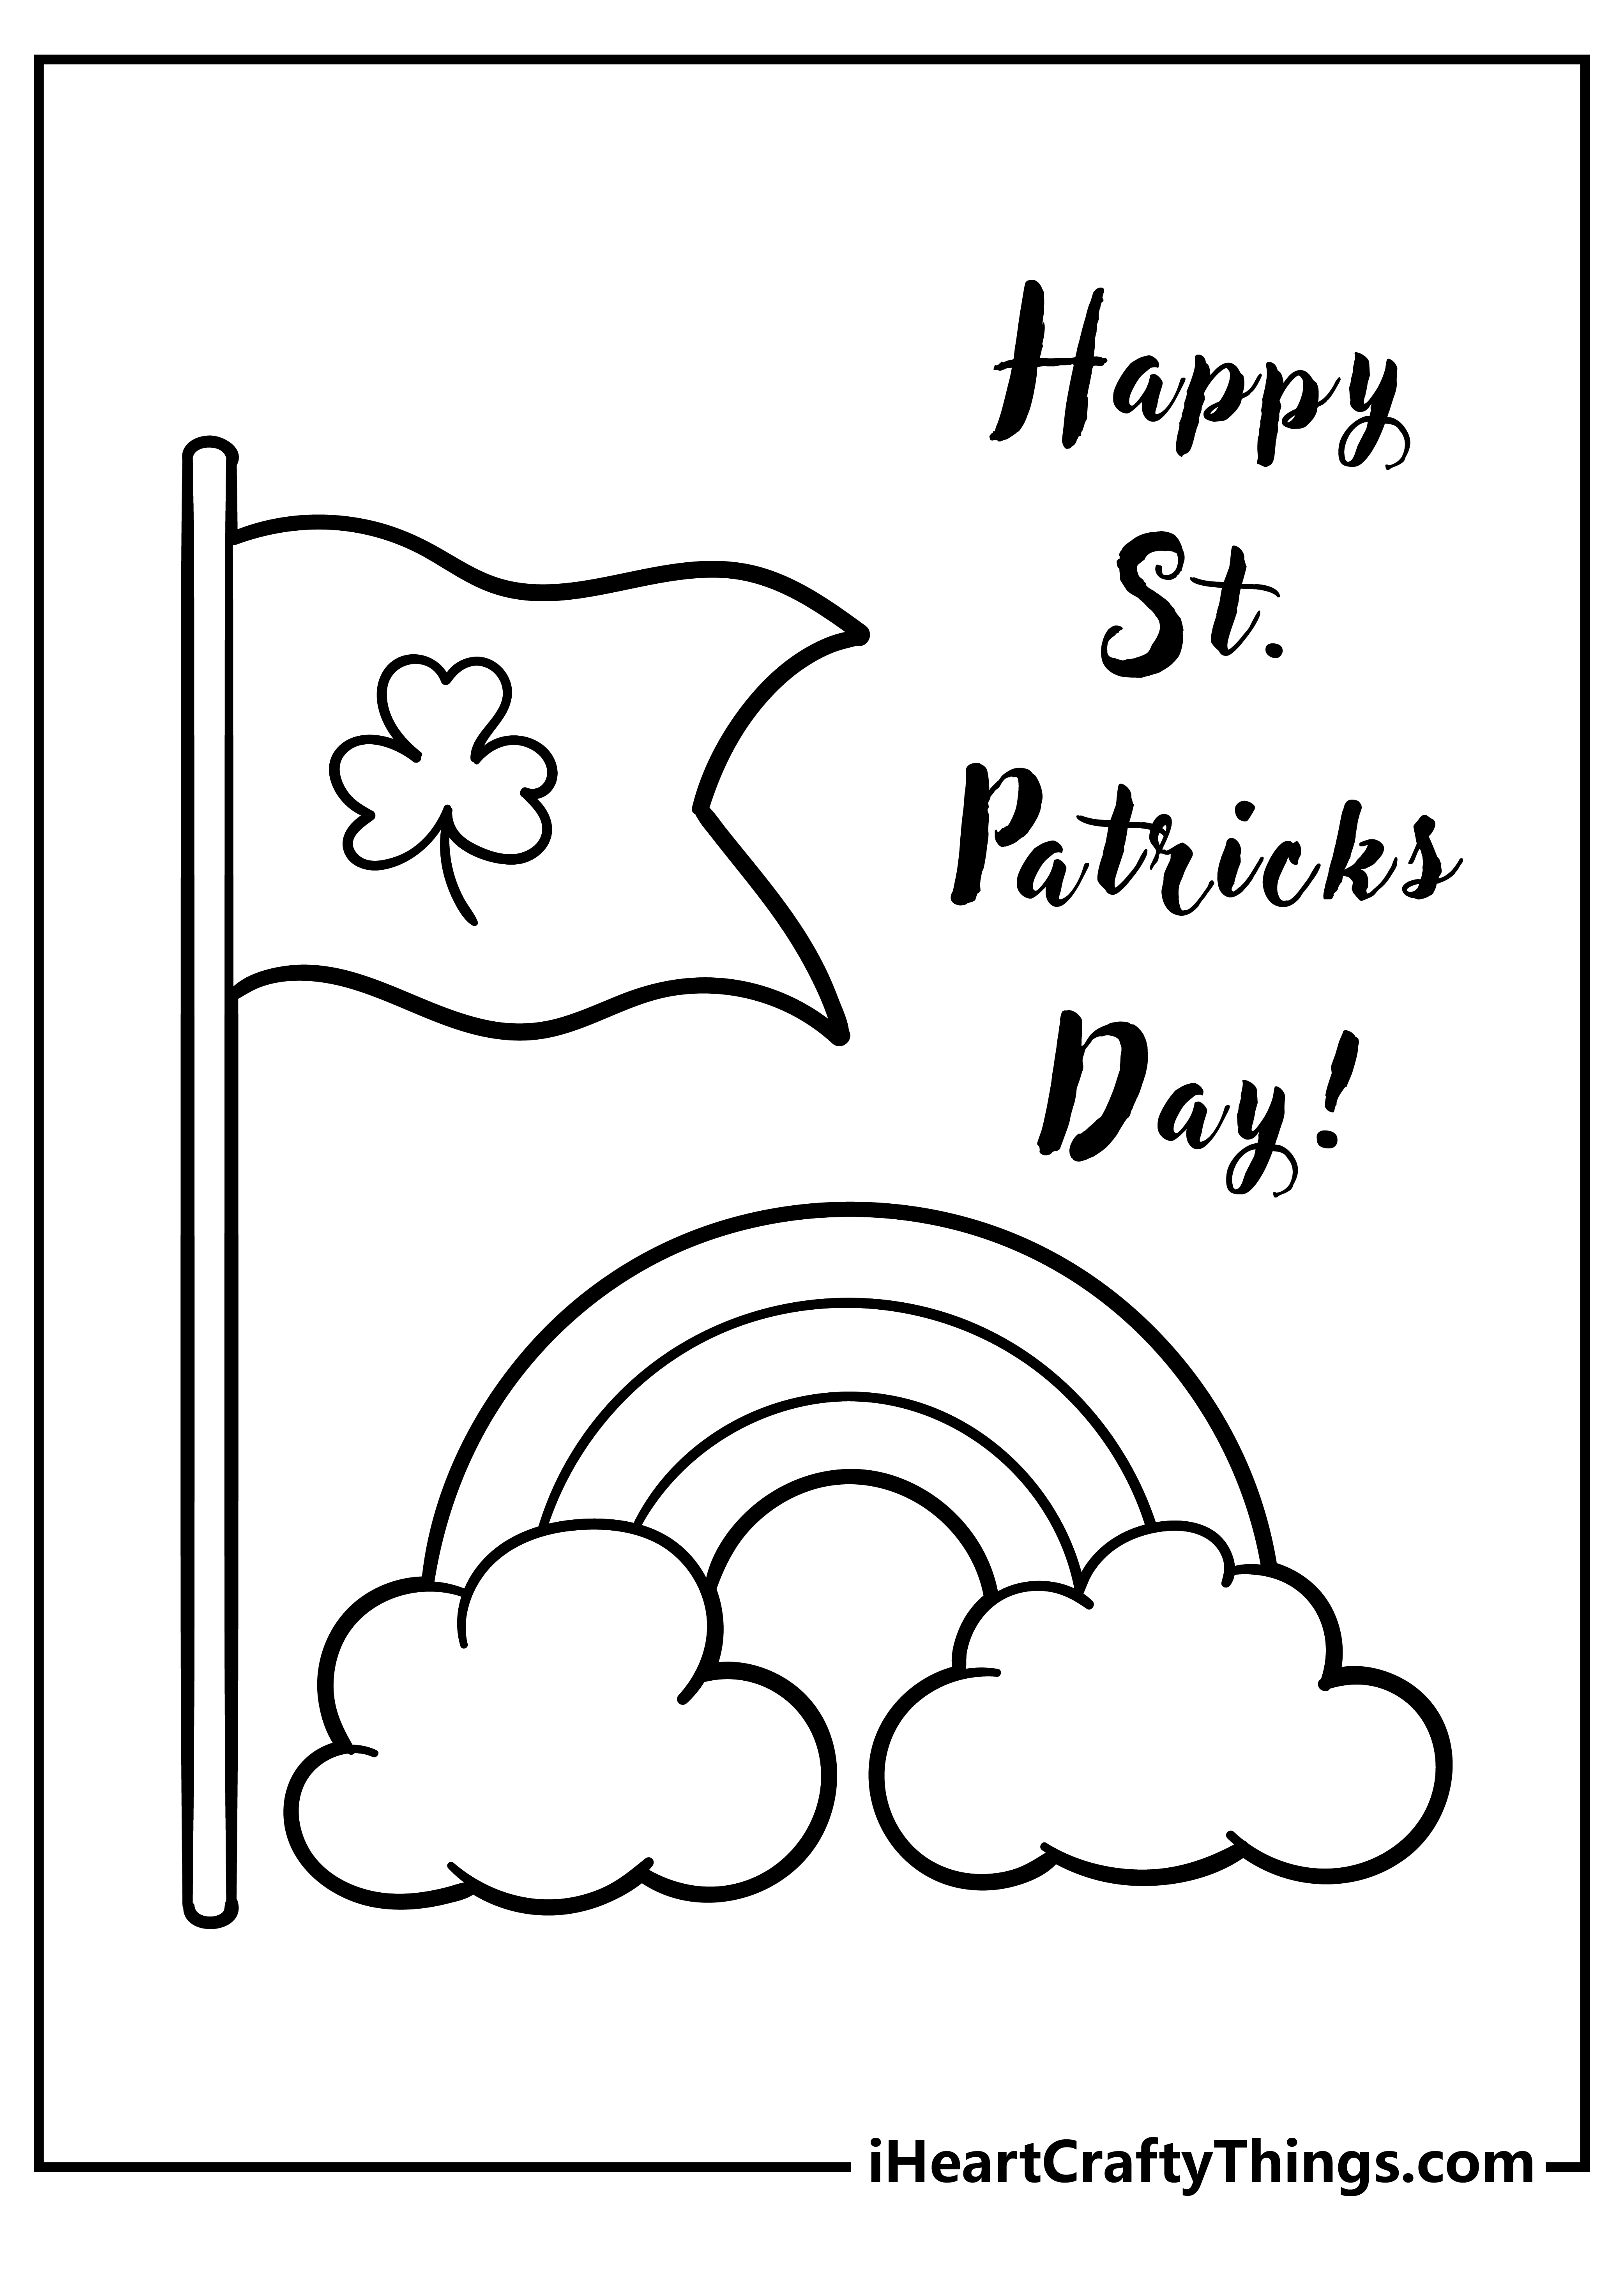 St Patrick’s Day Coloring Pages for preschoolers free printable